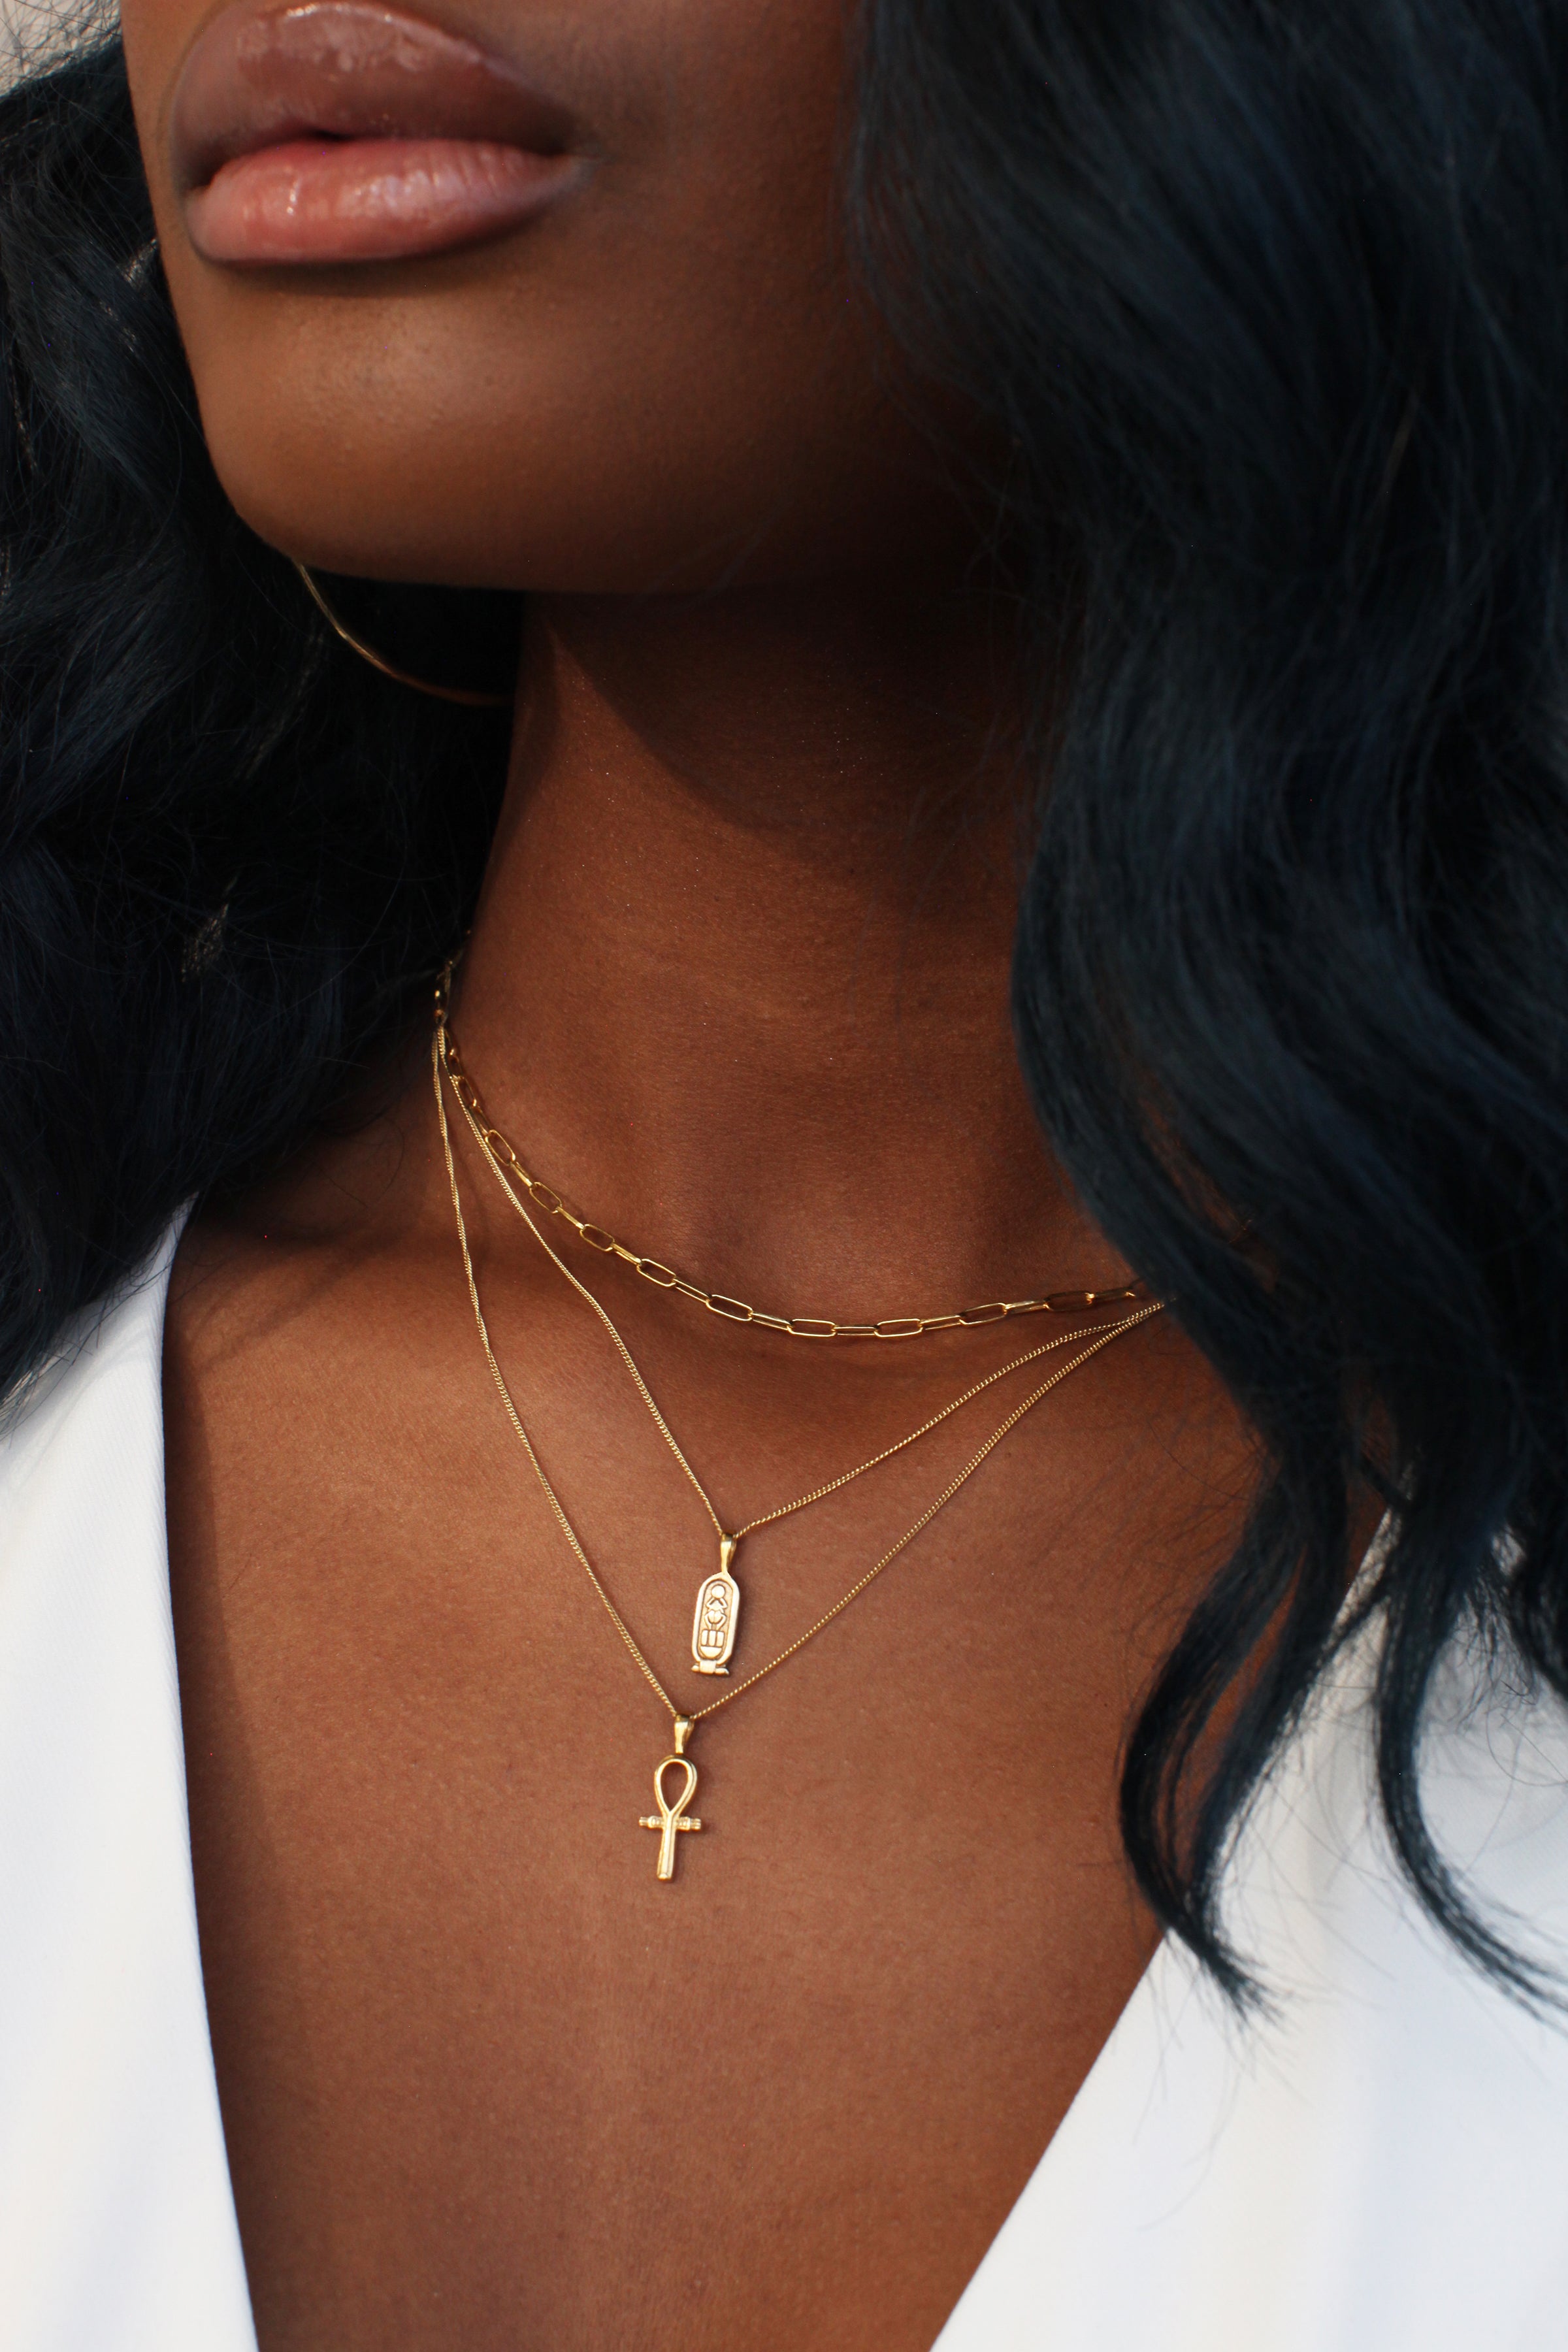 THE ANKH Necklace – omiwoods